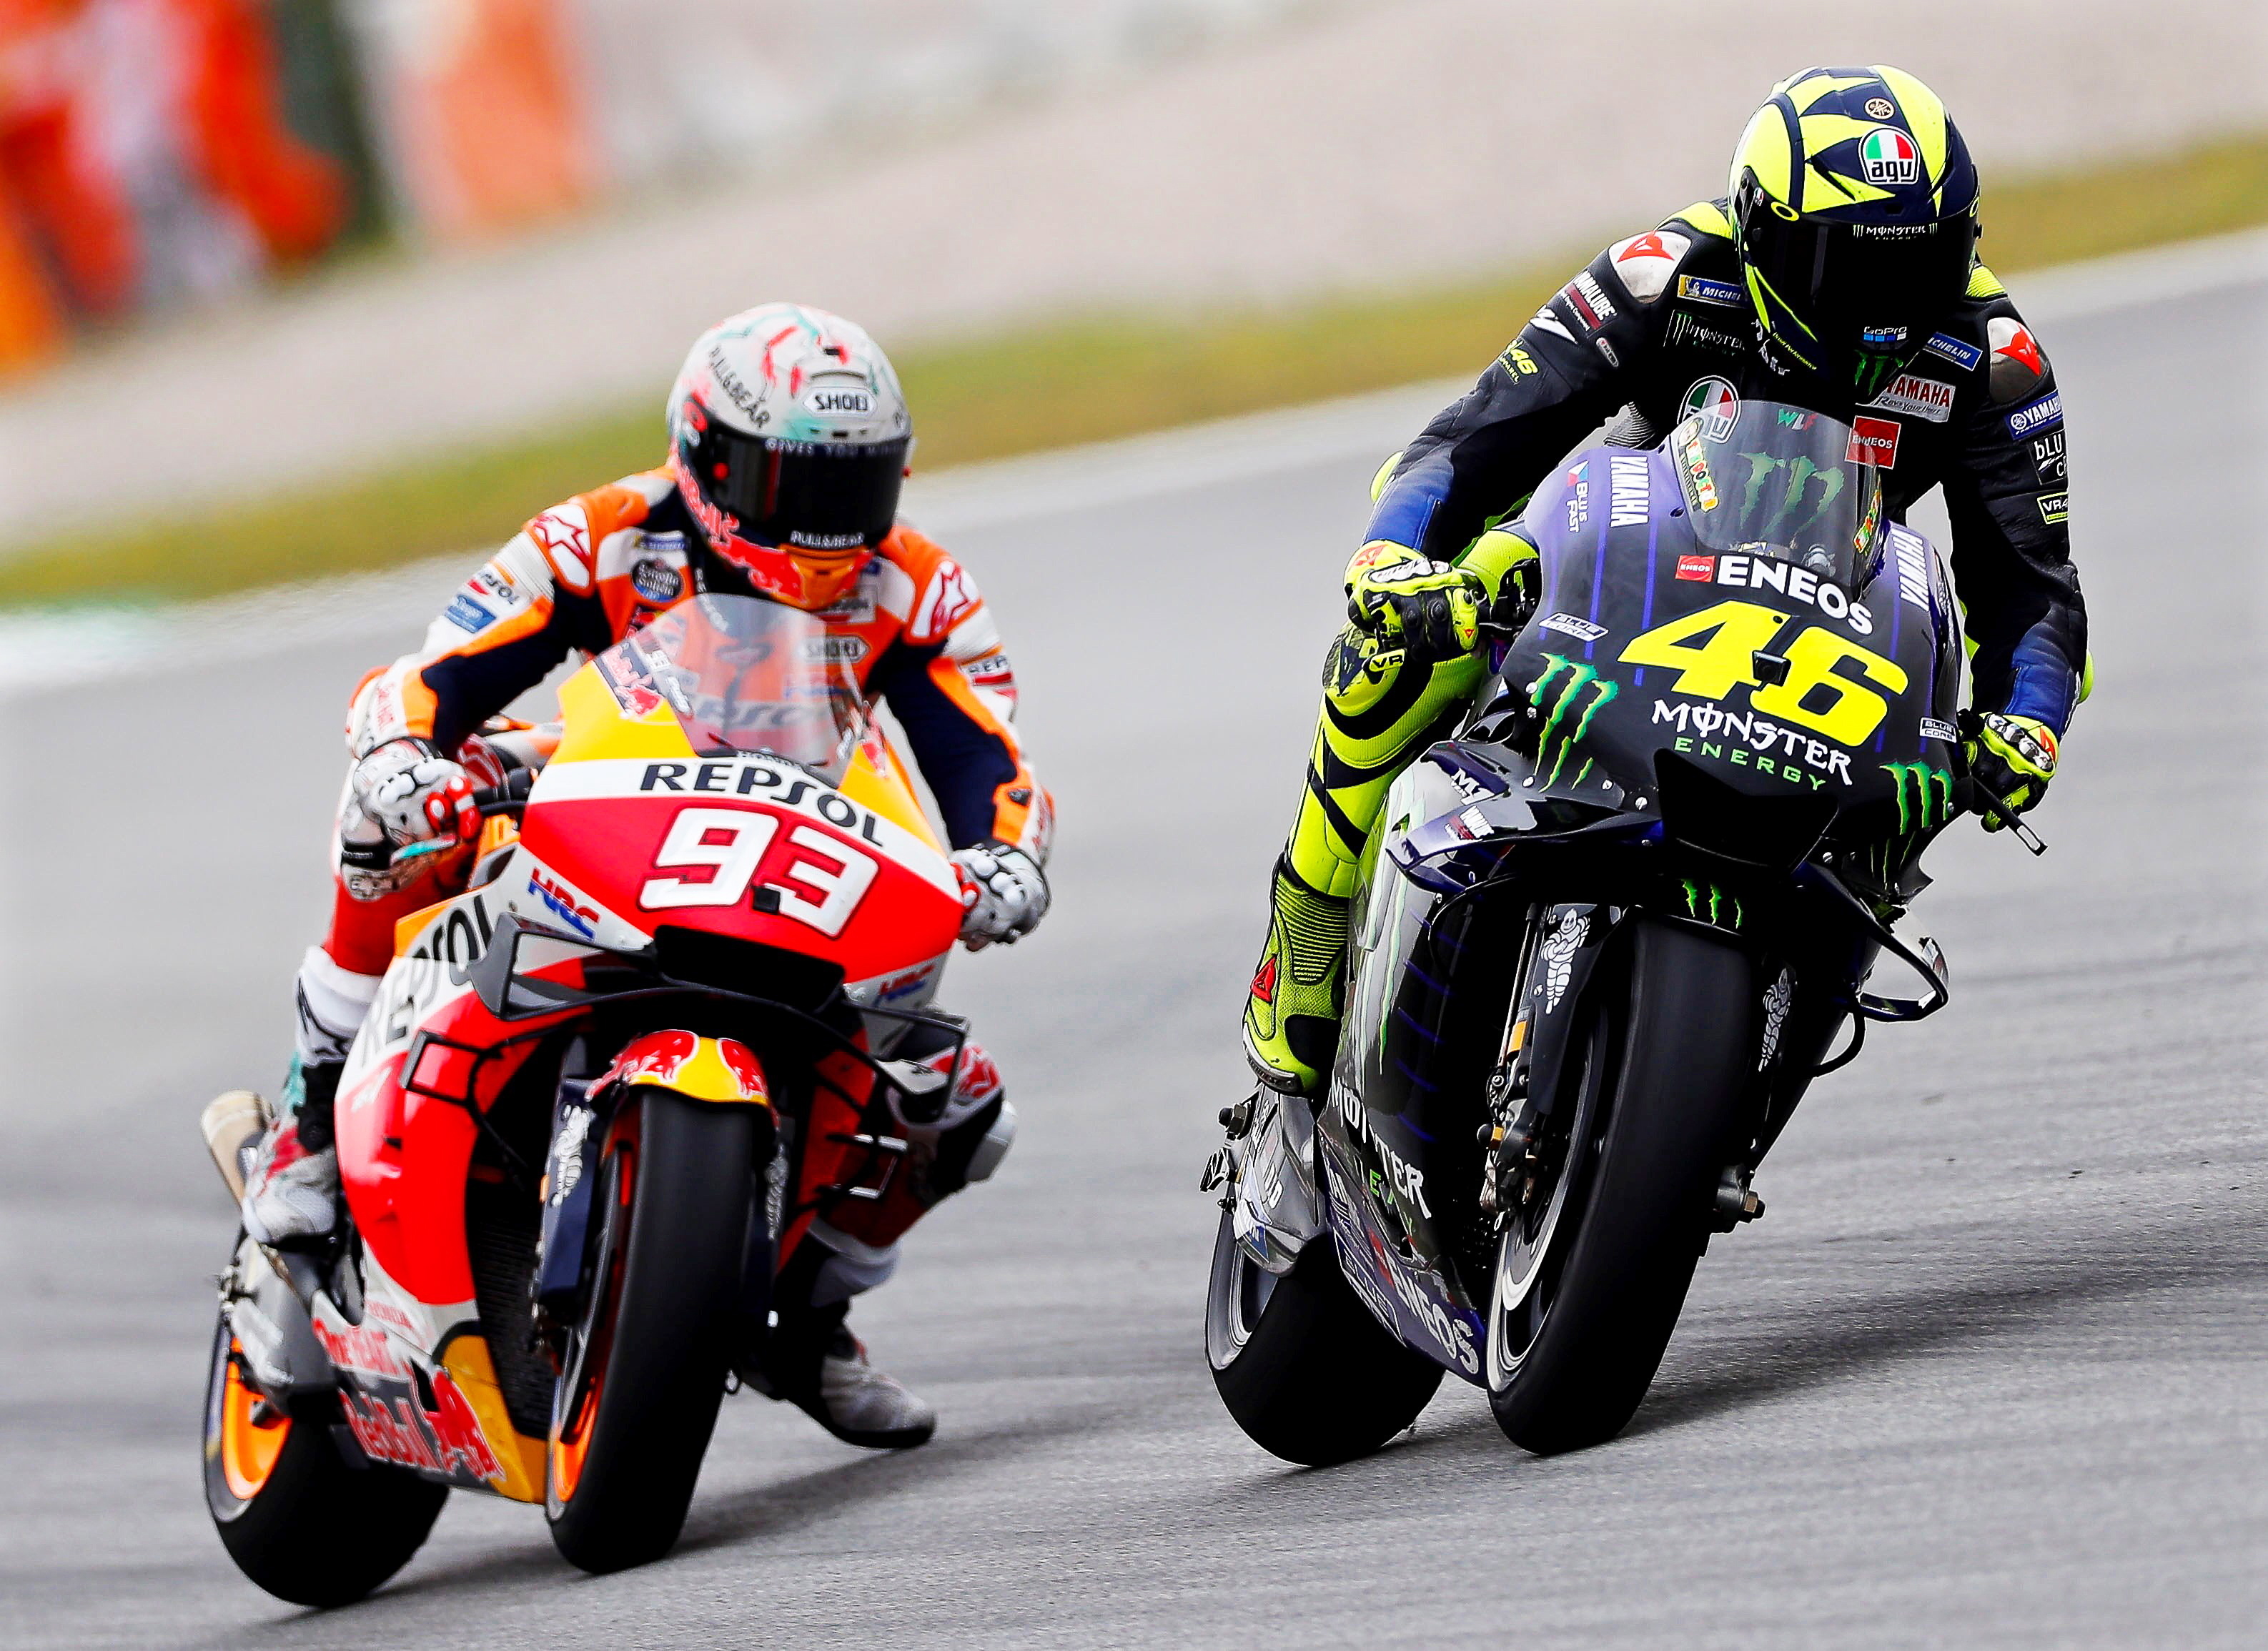 A Throwback To Assen 15 Rossi And Marquez Go Head To Head Il Globo